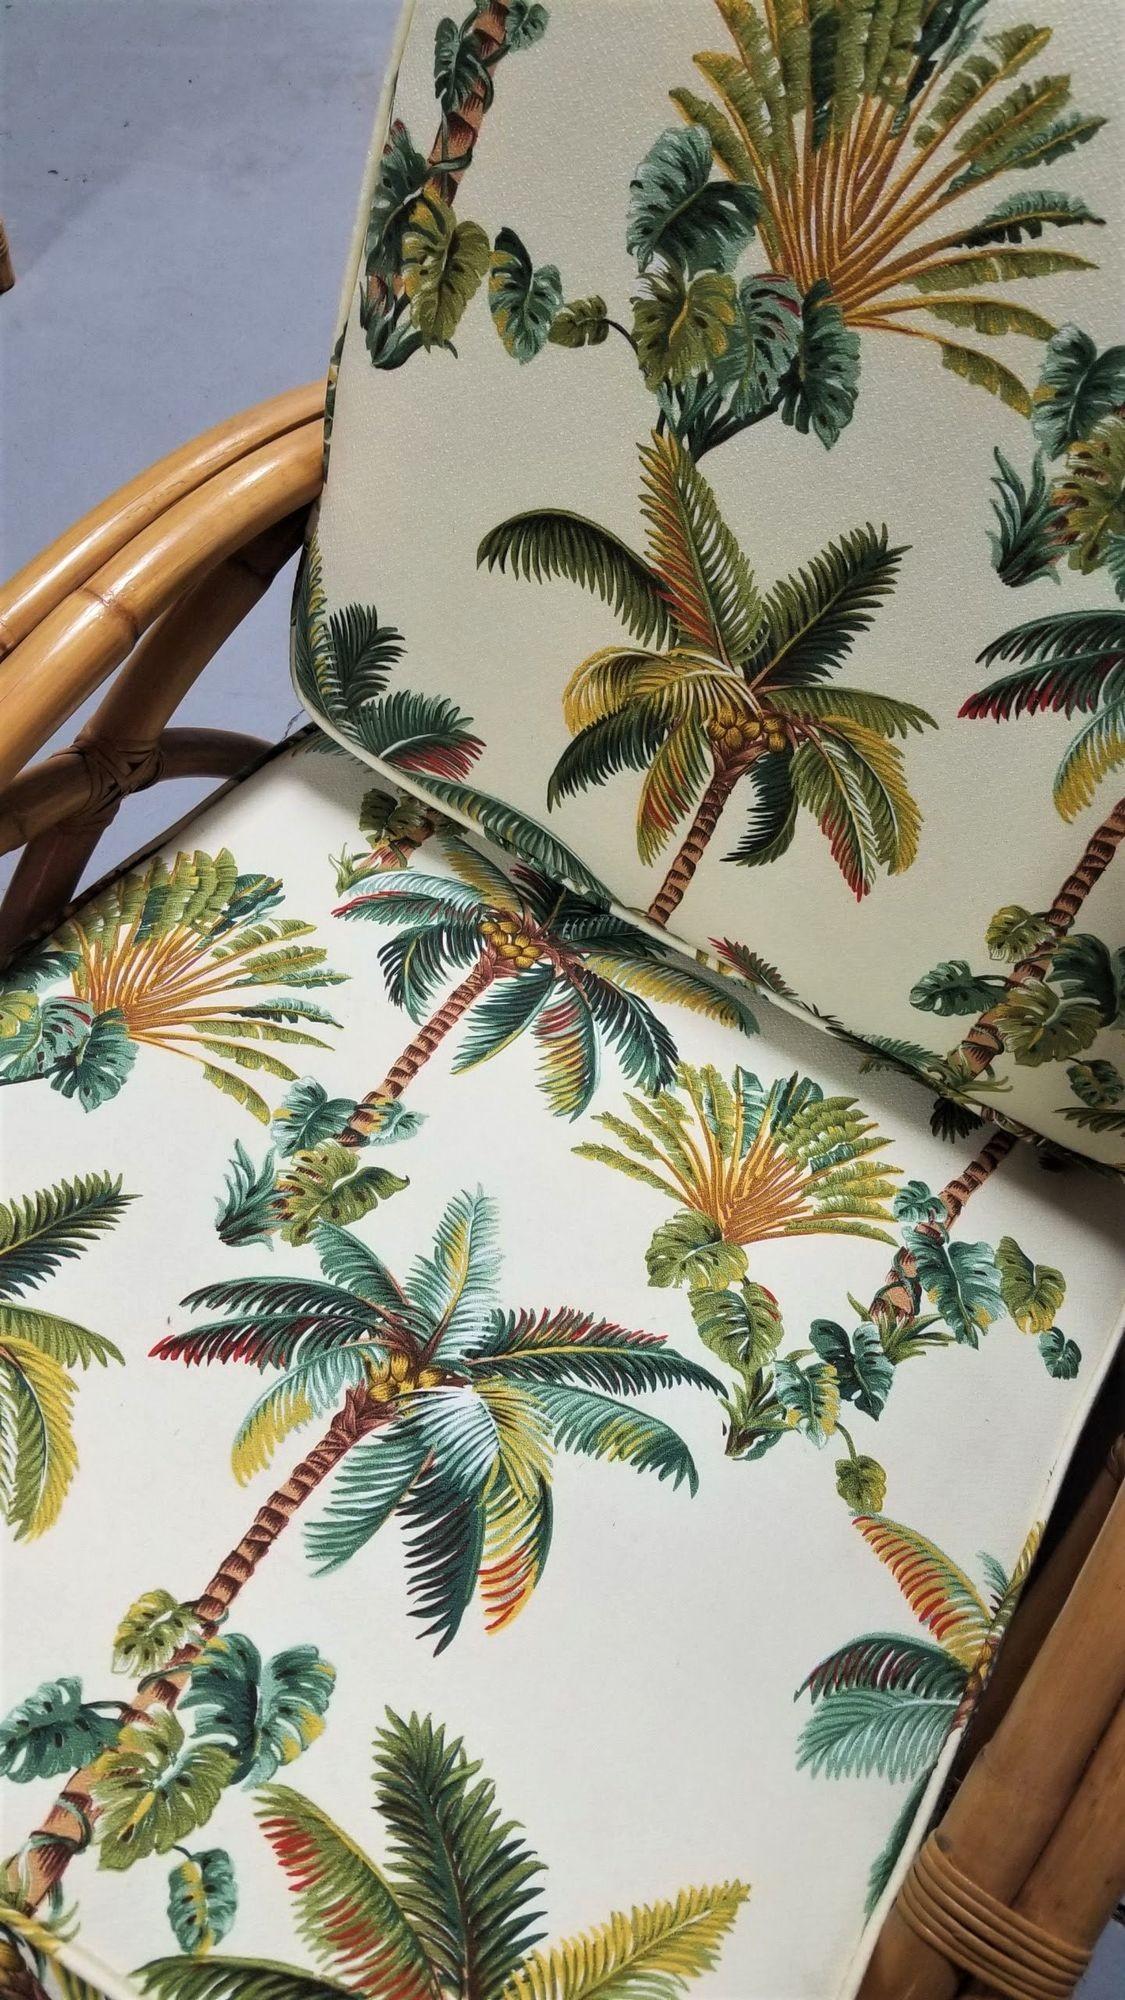 Restored 2-strand rattan half moon arms featuring a crossing arch design and tropical palm print cushions. 

We only purchase and sell only the best and finest rattan furniture made by the best and most well-known American designers and